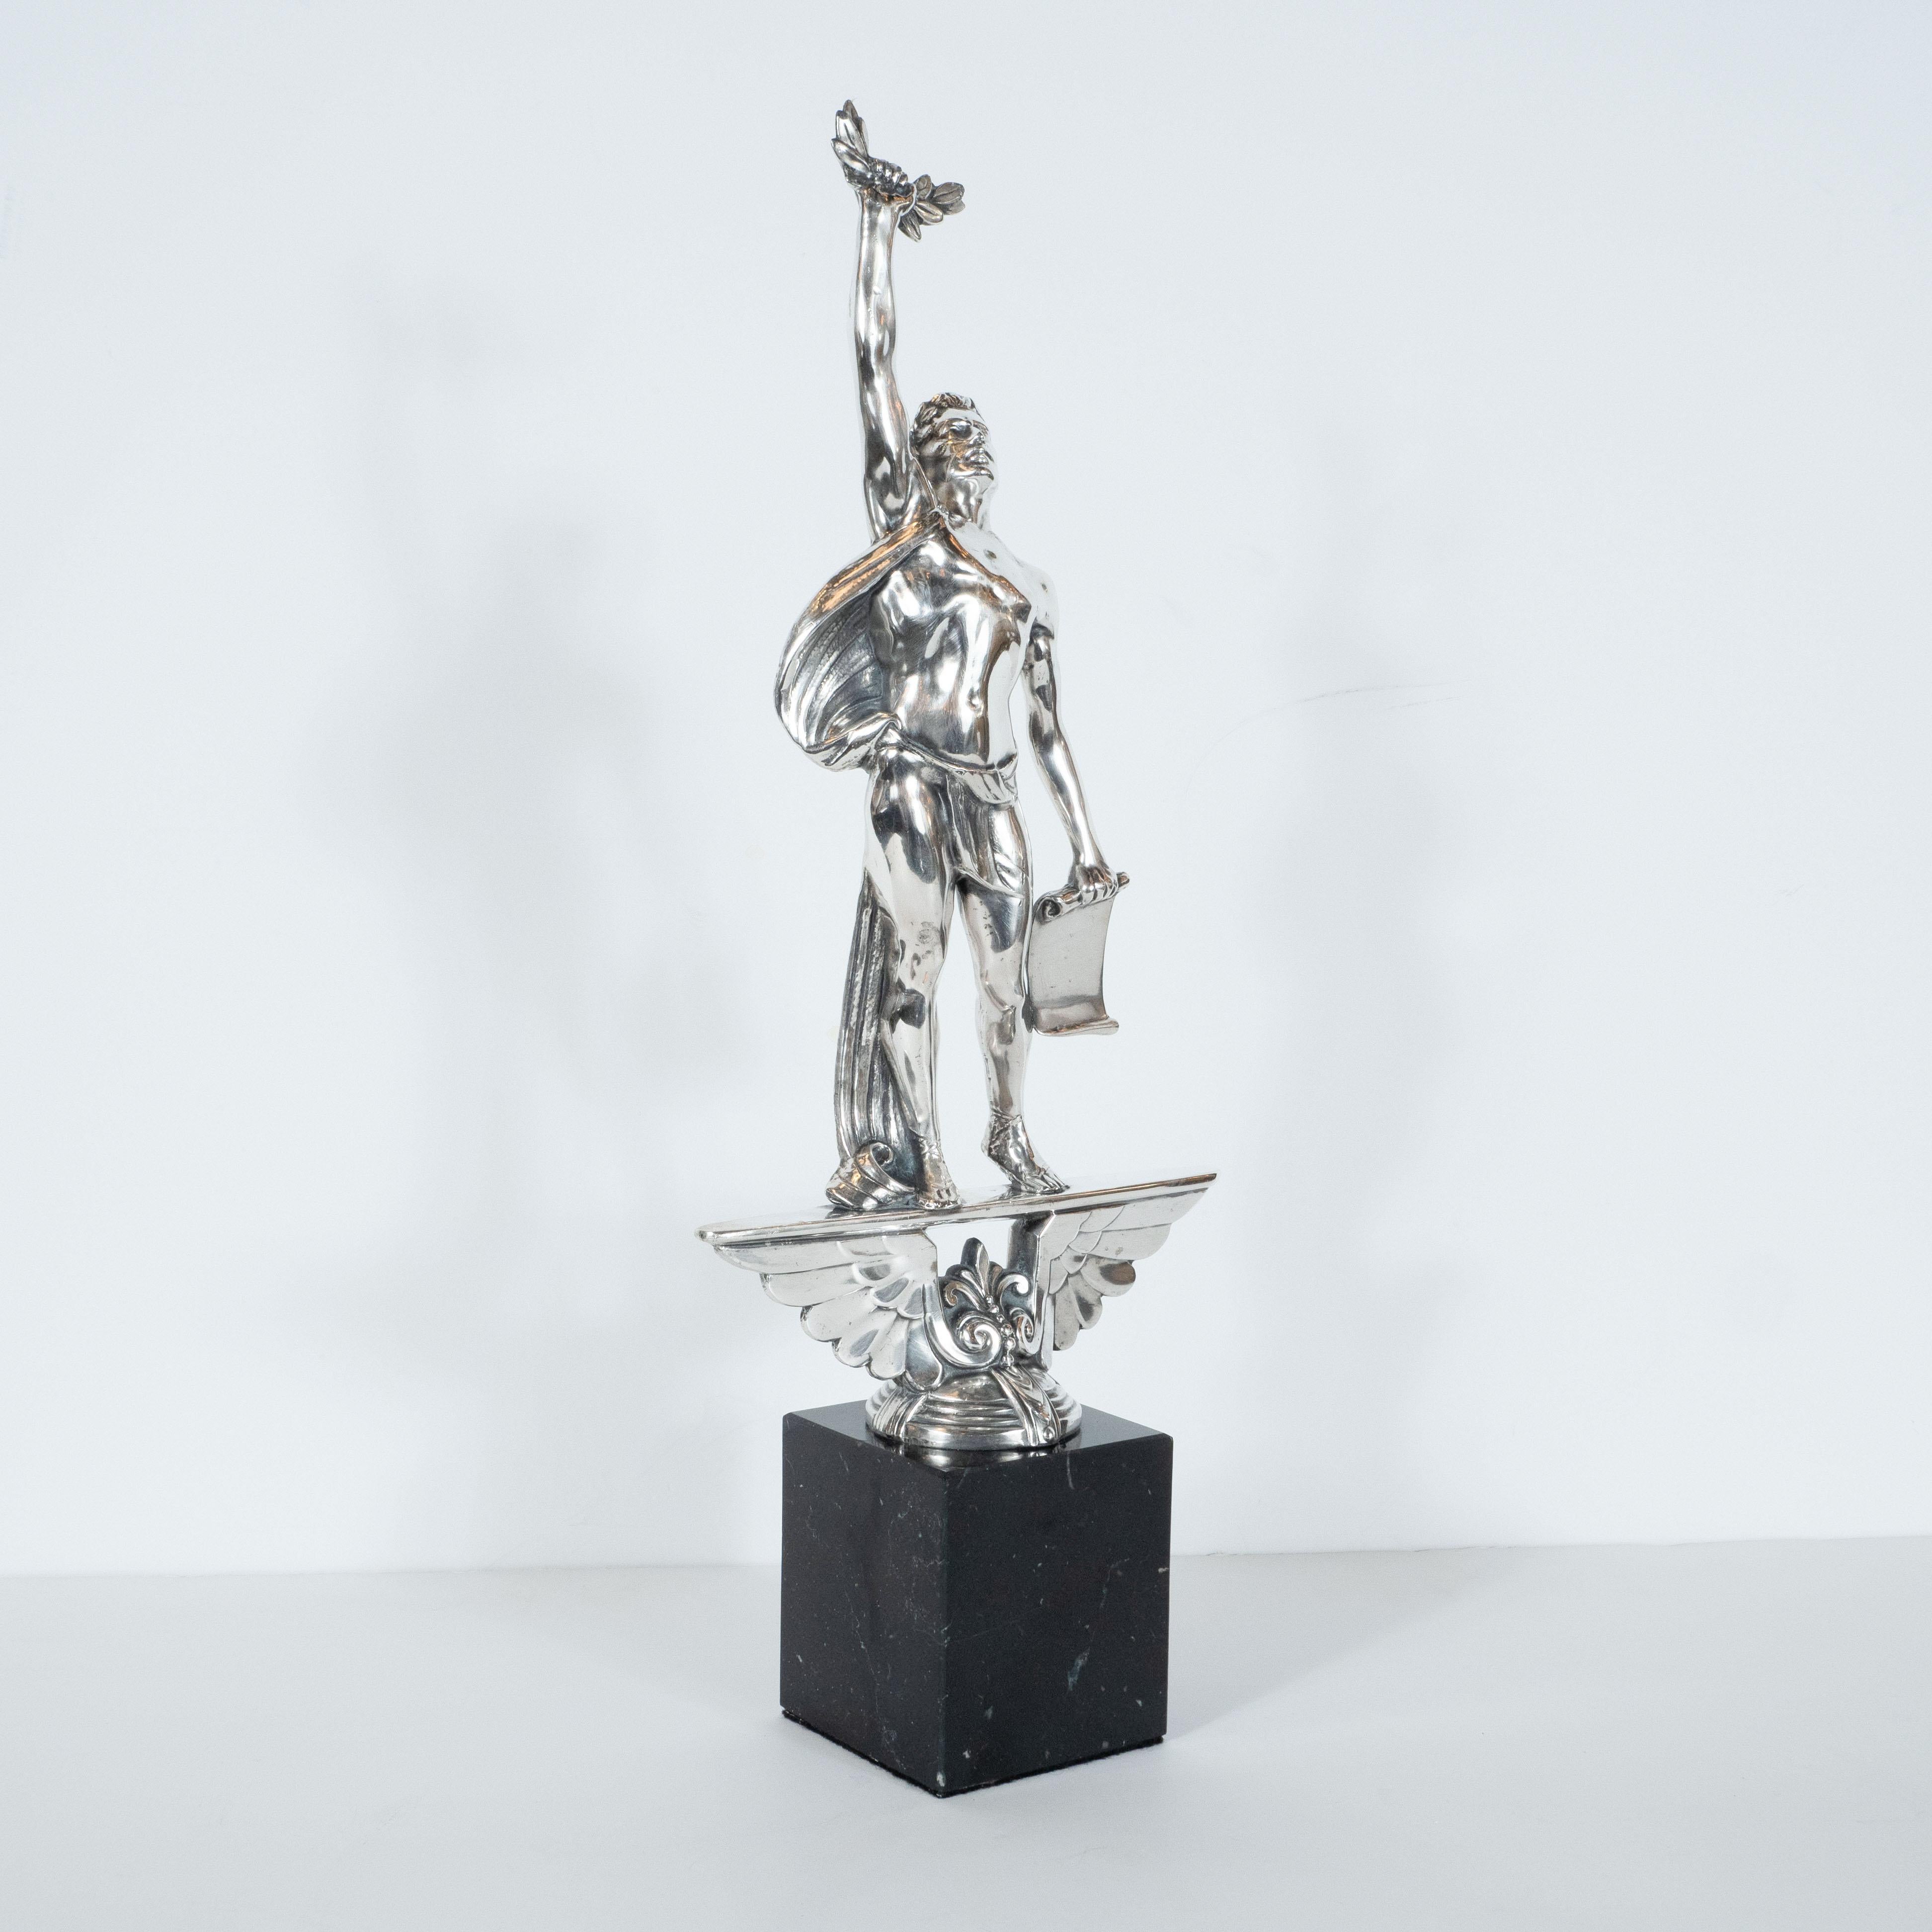 Belgian Black Marble Art Deco Classical Figurative Silvered Sculpture with Wing and Acanthus Motifs